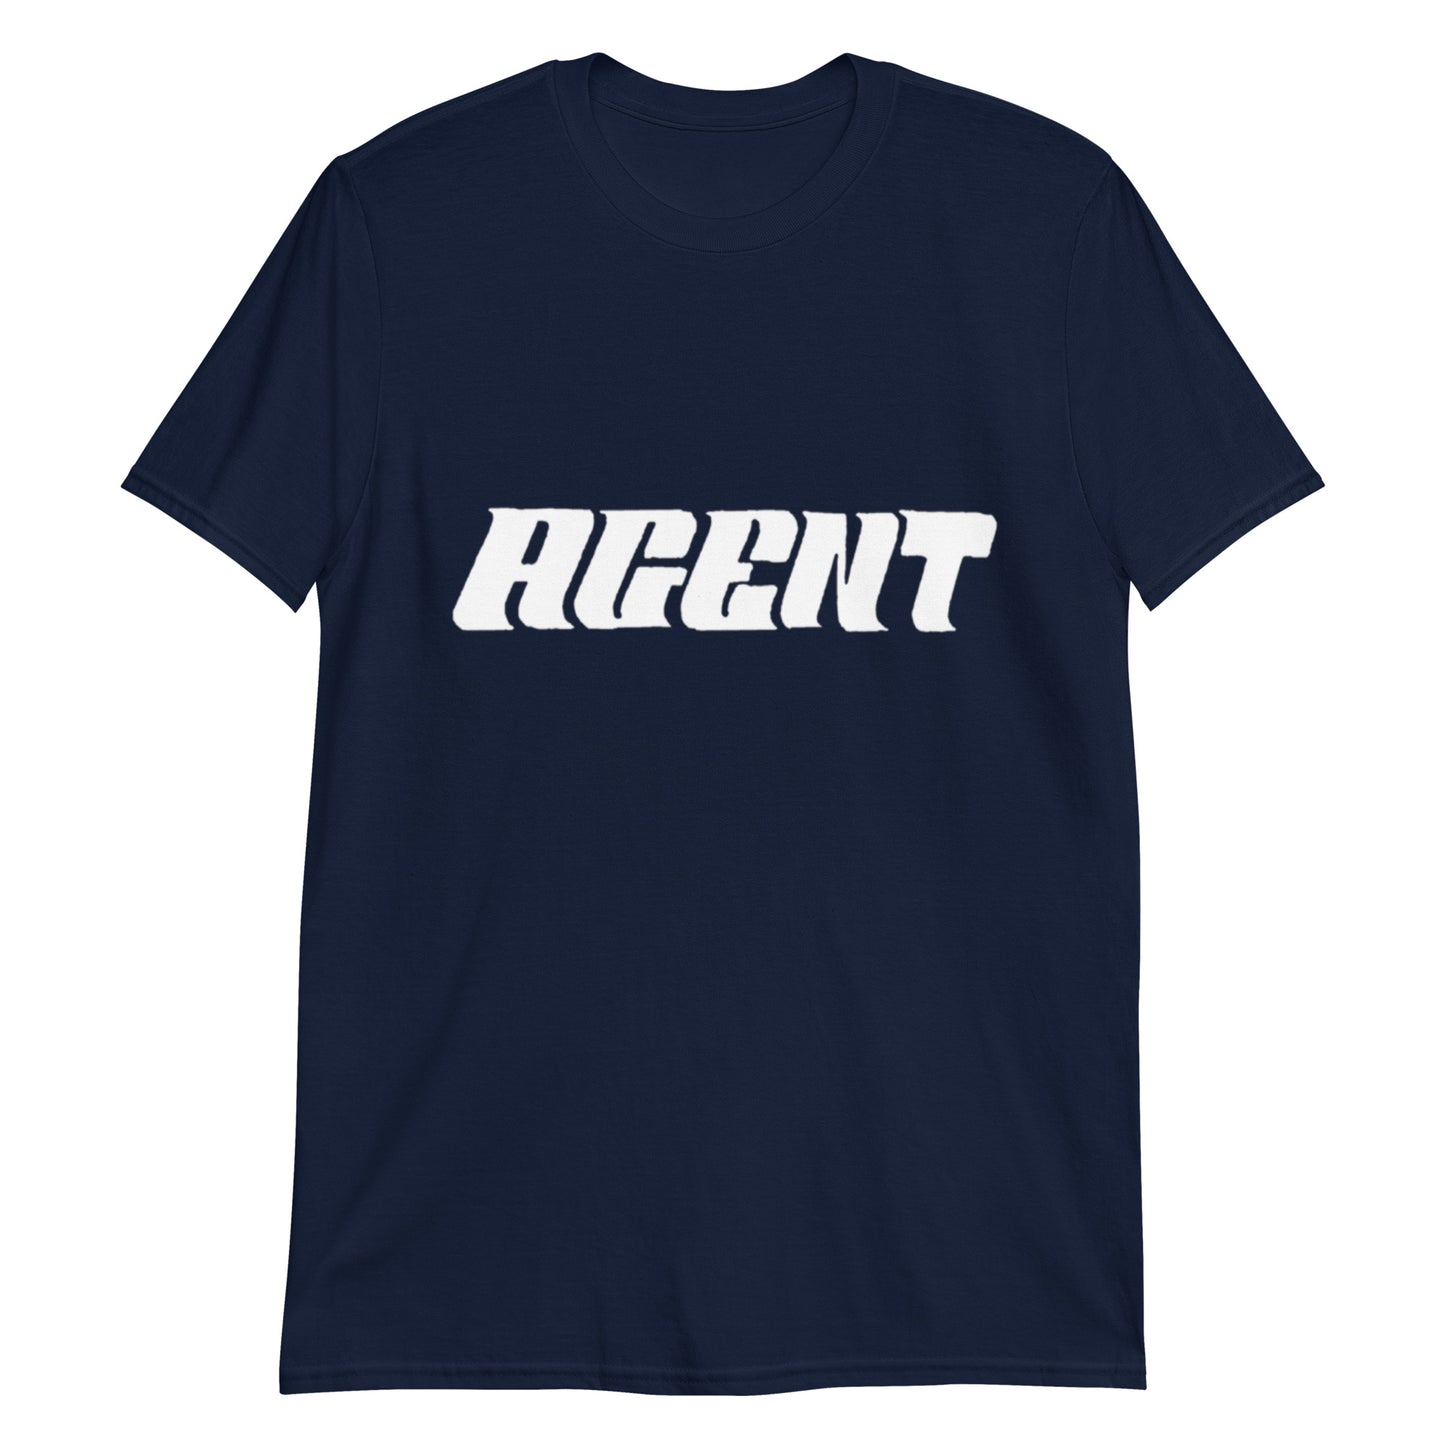 Agent White Letters T-Shirt -Discount Tee